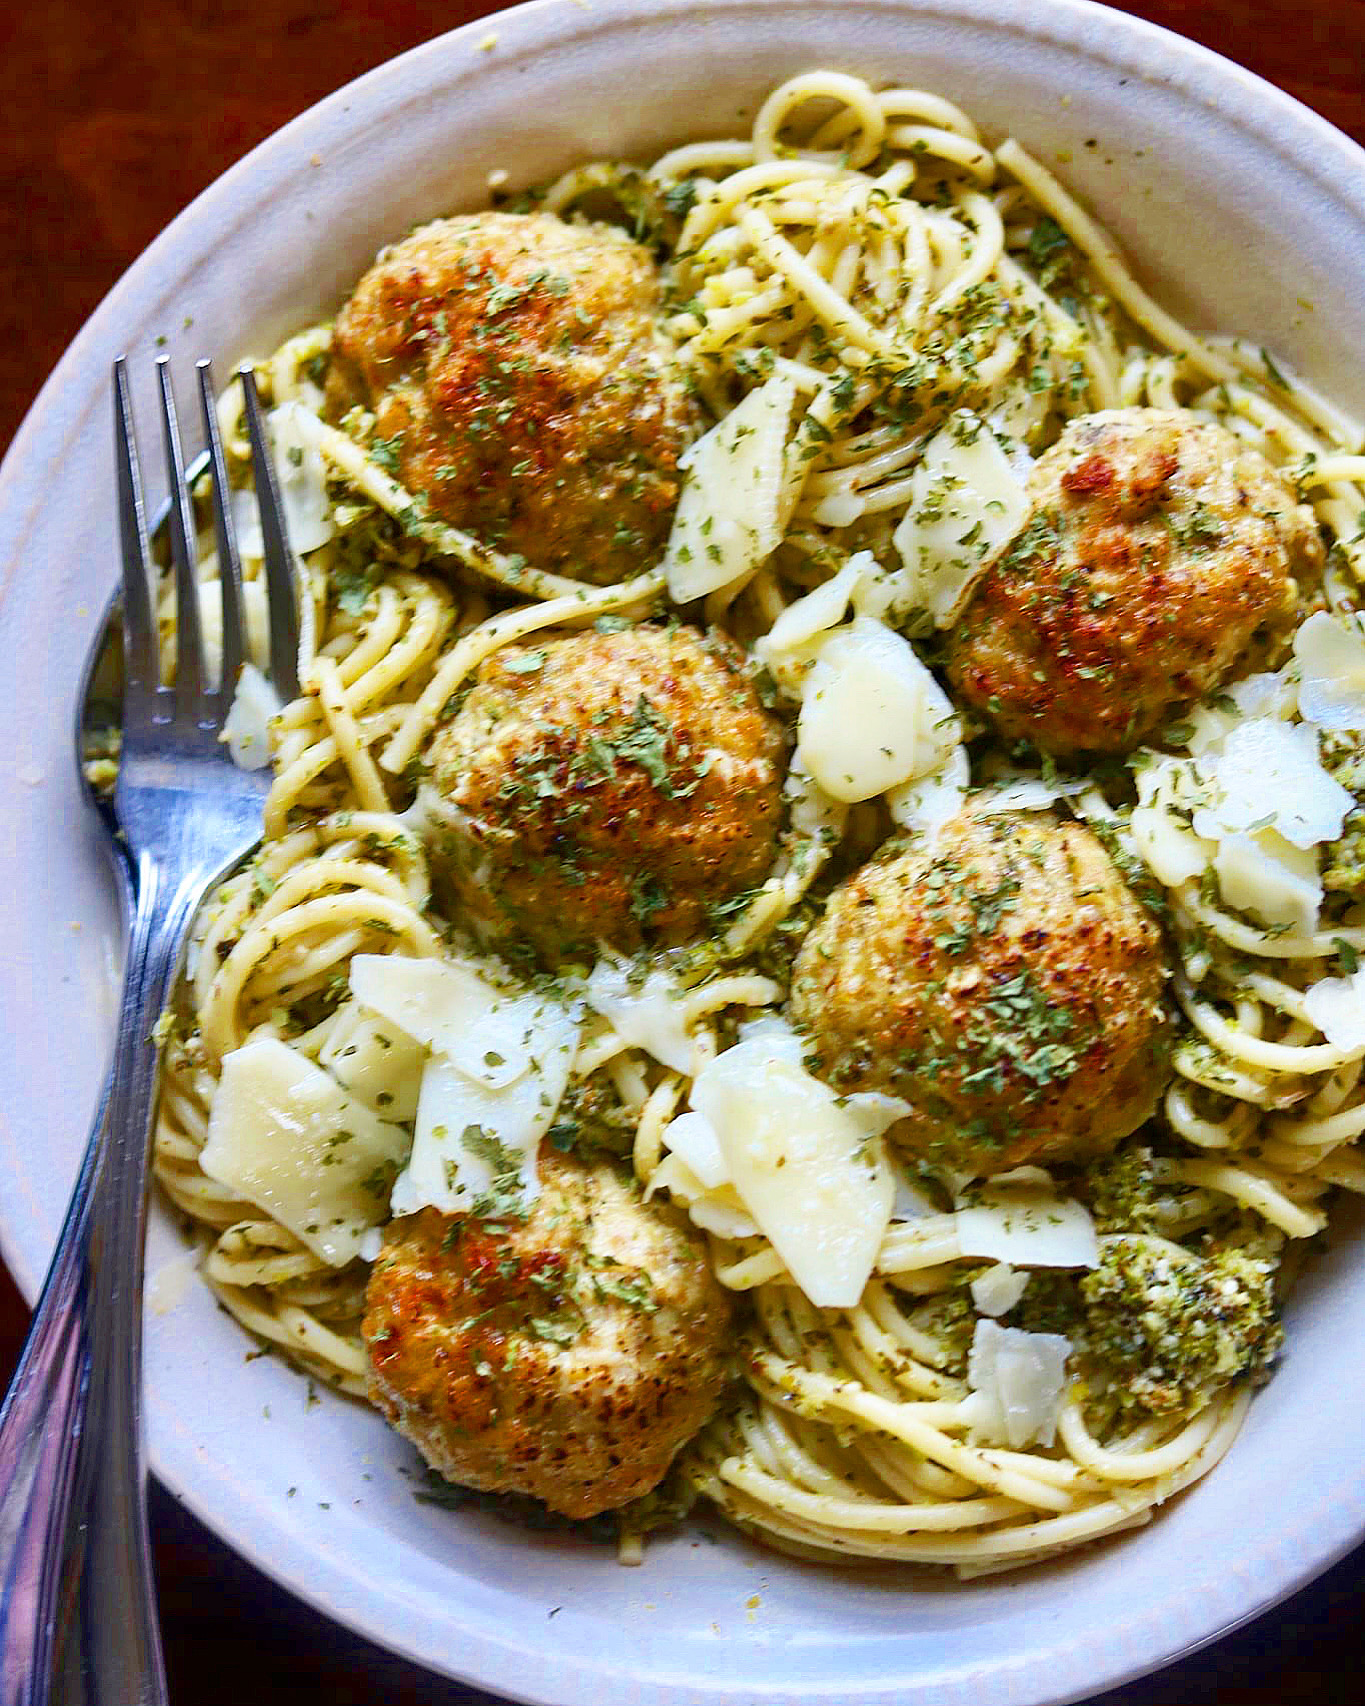 These Baked Chicken Meatballs with Broccoli Pesto Pasta is so, so good!